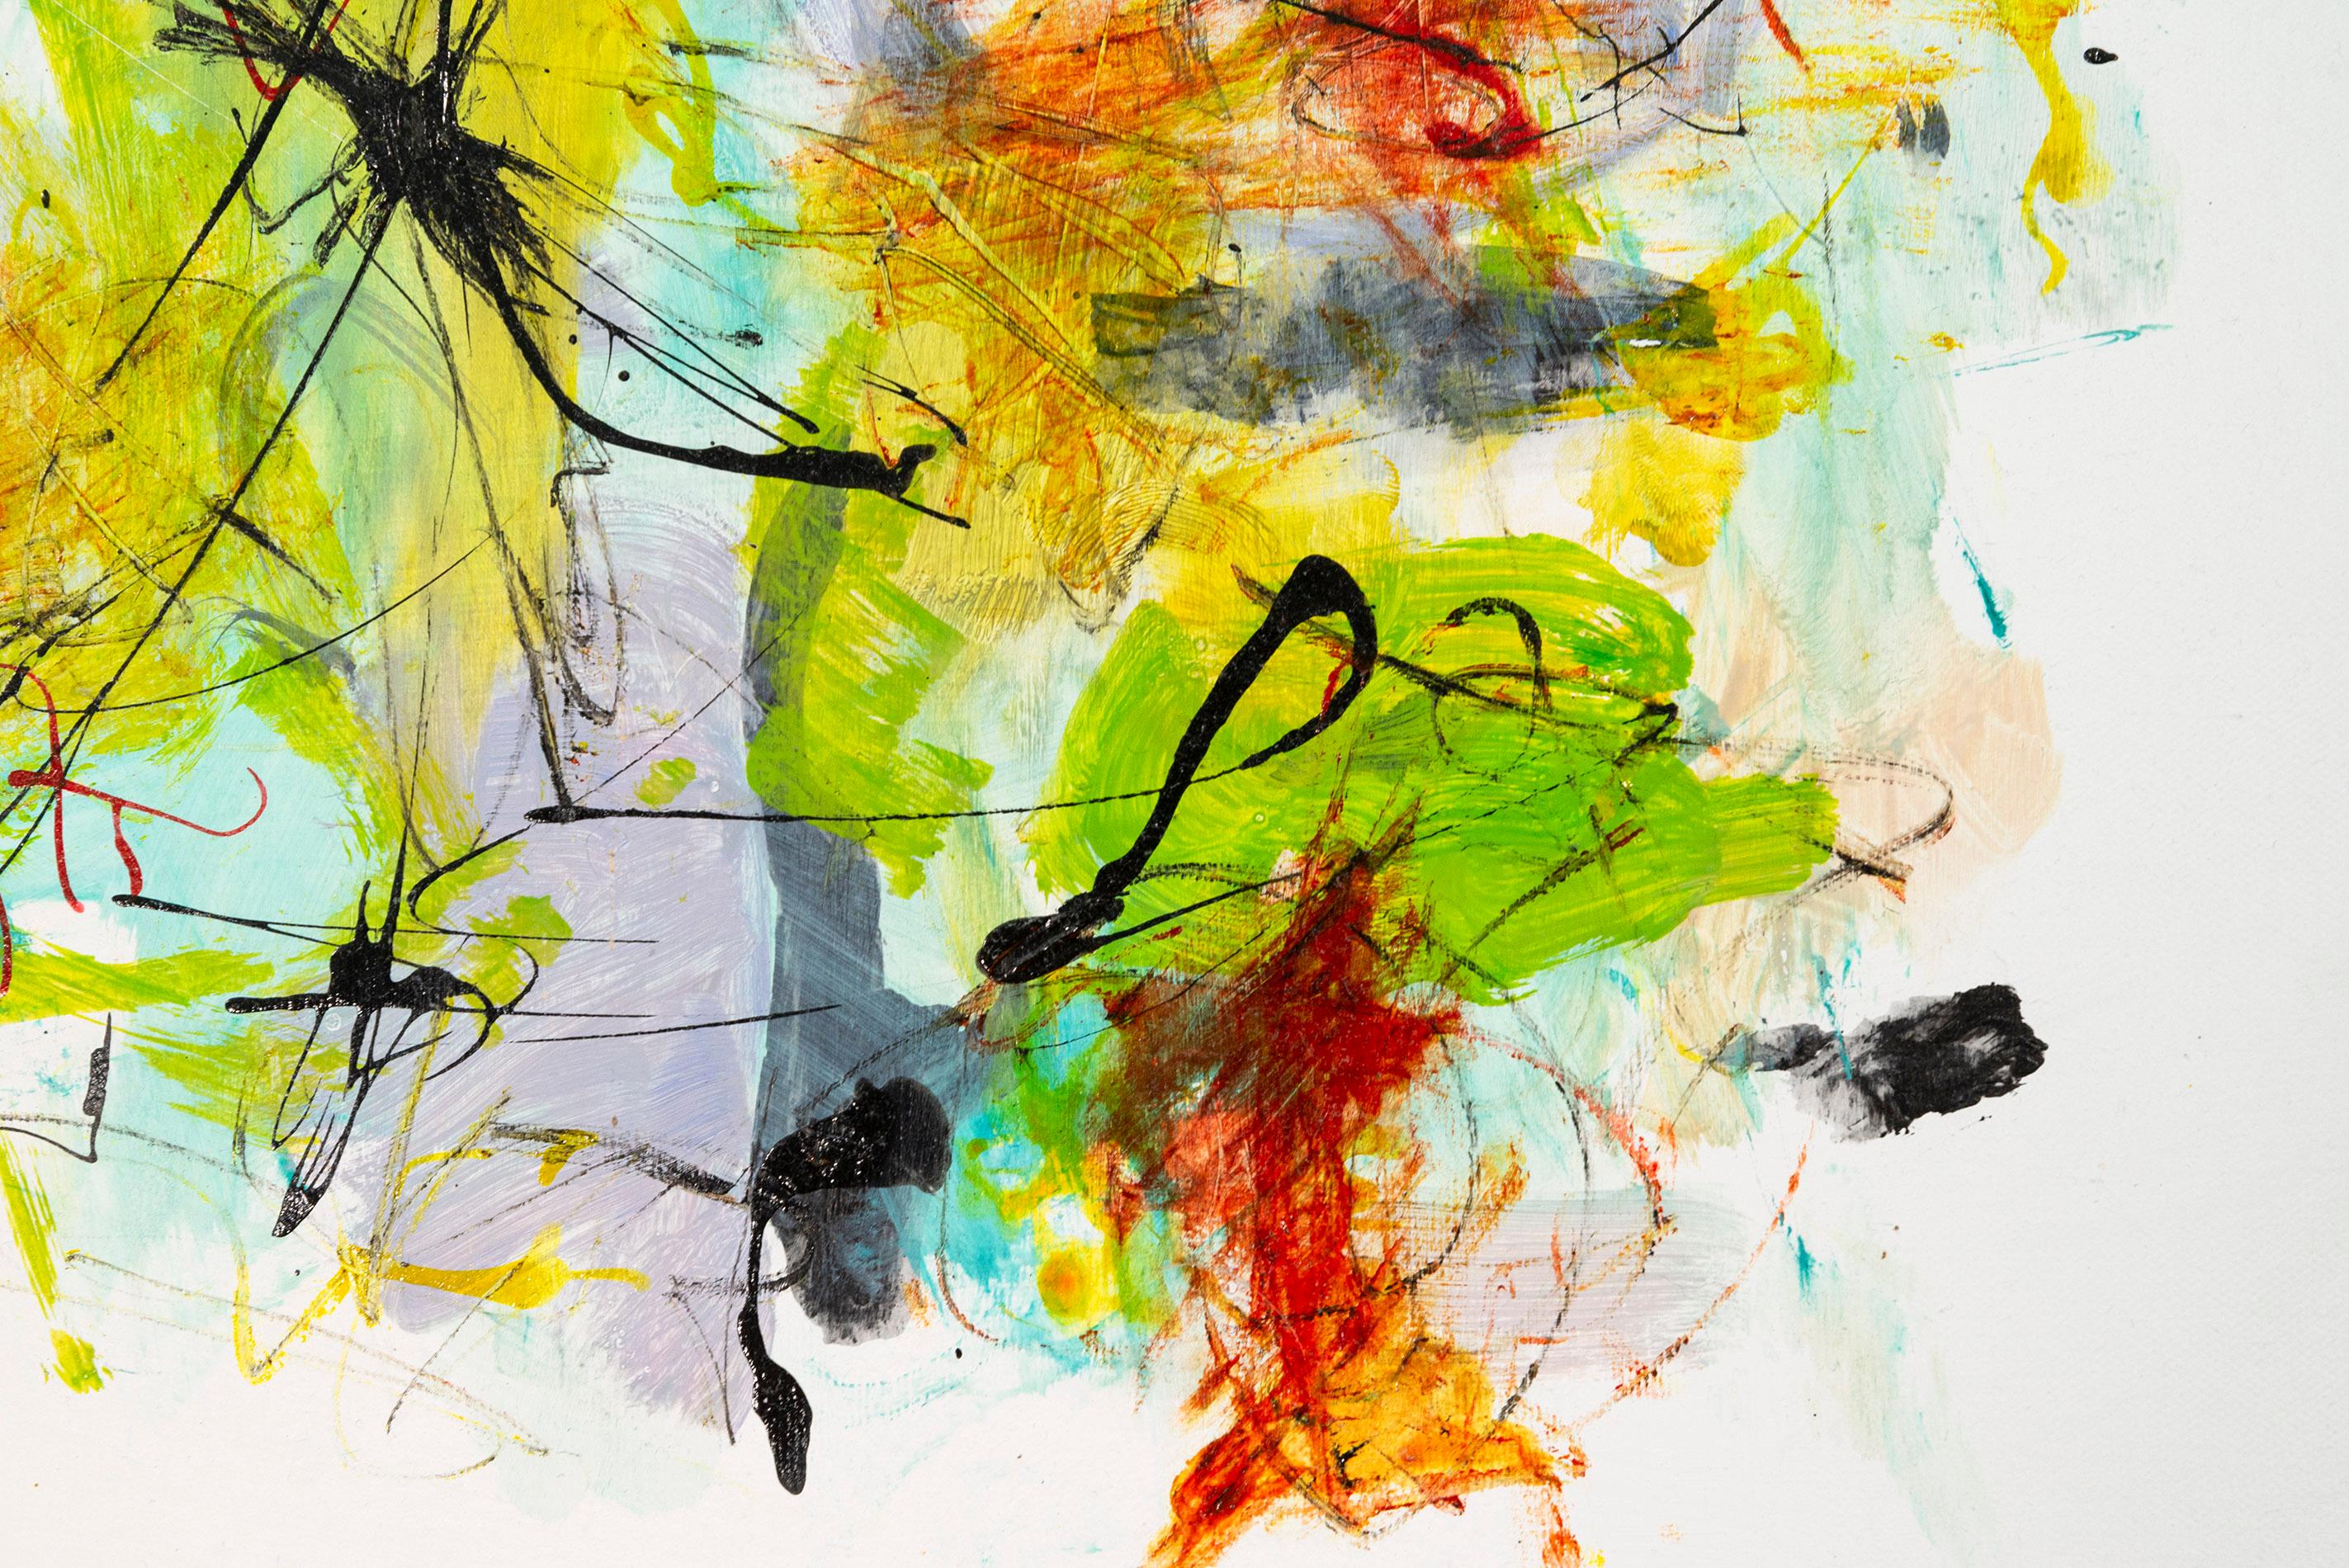 A melange of fresh, modern colours swirl about the canvas in this abstract painting by Scott Pattinson. The Canadian artist is known for his intuitive sense of colour. This expressive piece is a wild assortment of lime green, yellow, red, orange,